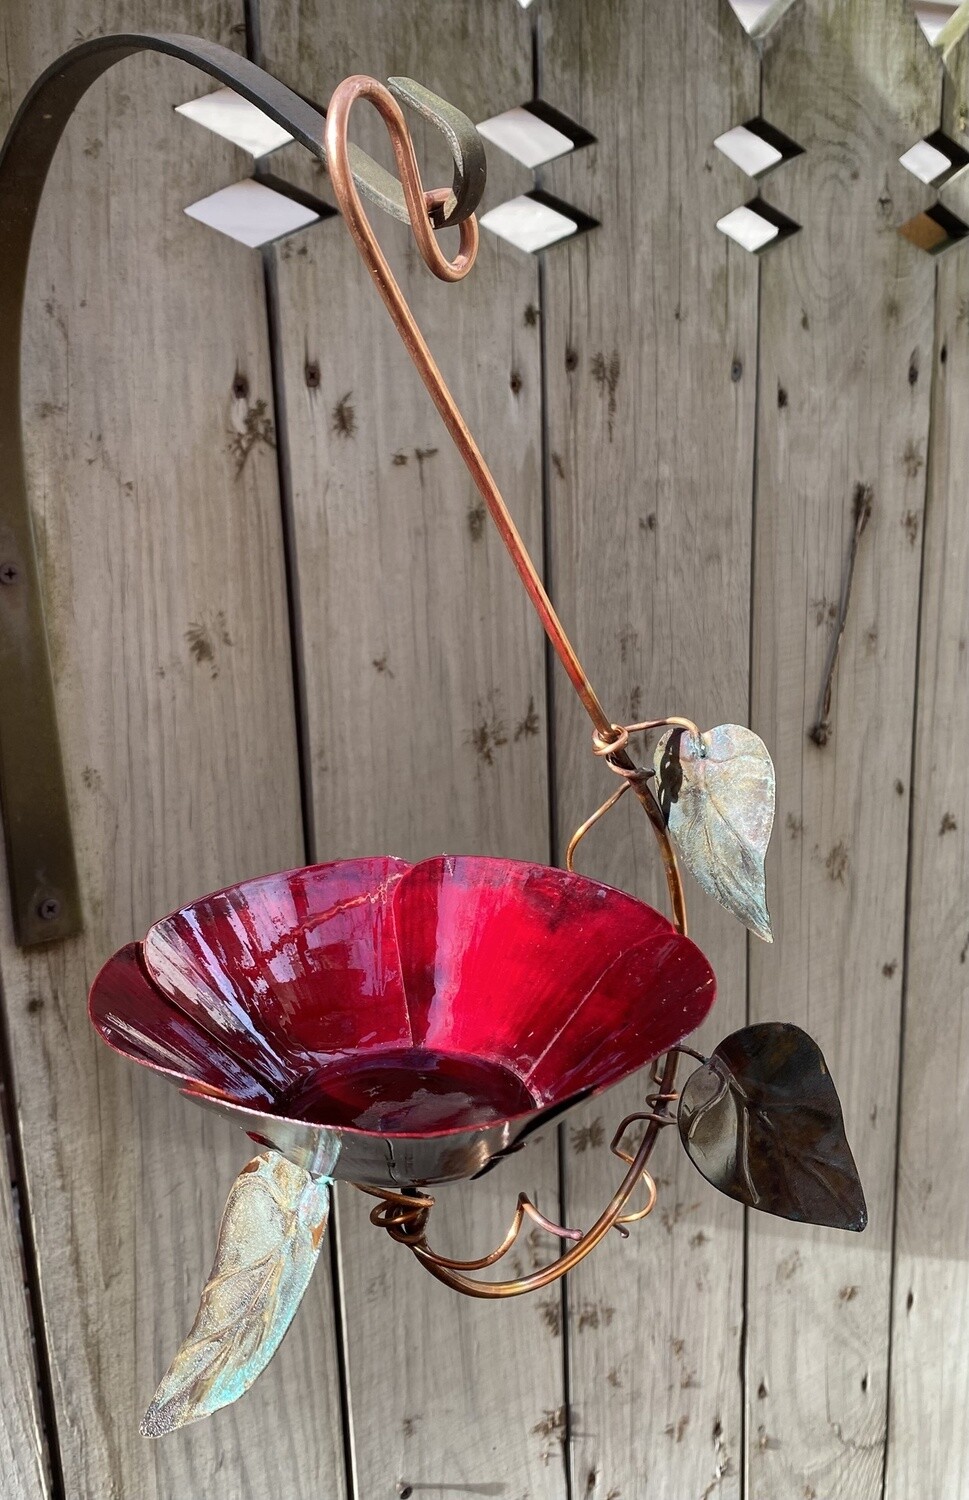 Haw Copper and Copper Painted Bird Feeder